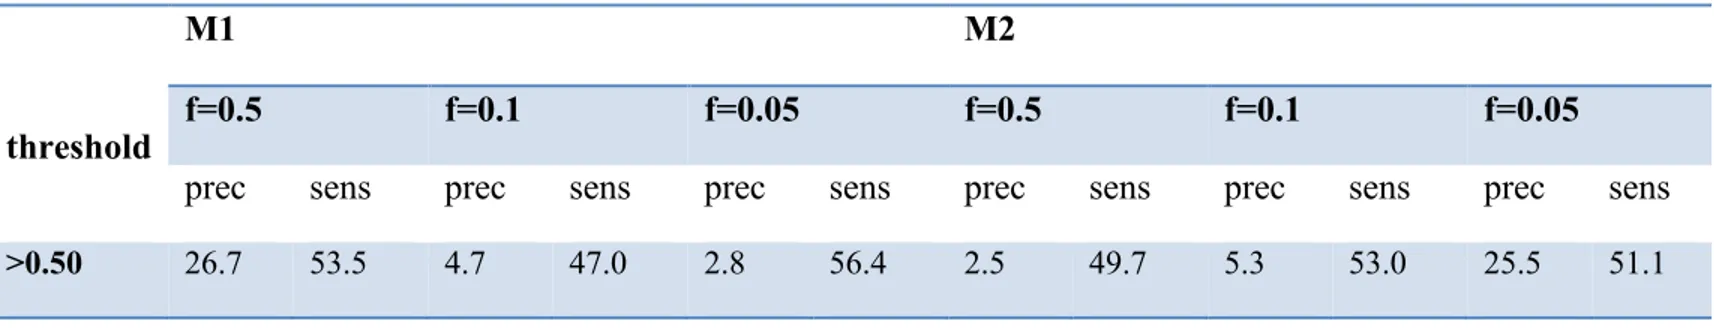 Table  2-IV.  Precision  (prec)  and  sensitivity  (sens)  as  a  function  of  the  proportion  of  true  (simulated)  differentially selected sites (f) in condition B57+ hosts, under model M1 and M2